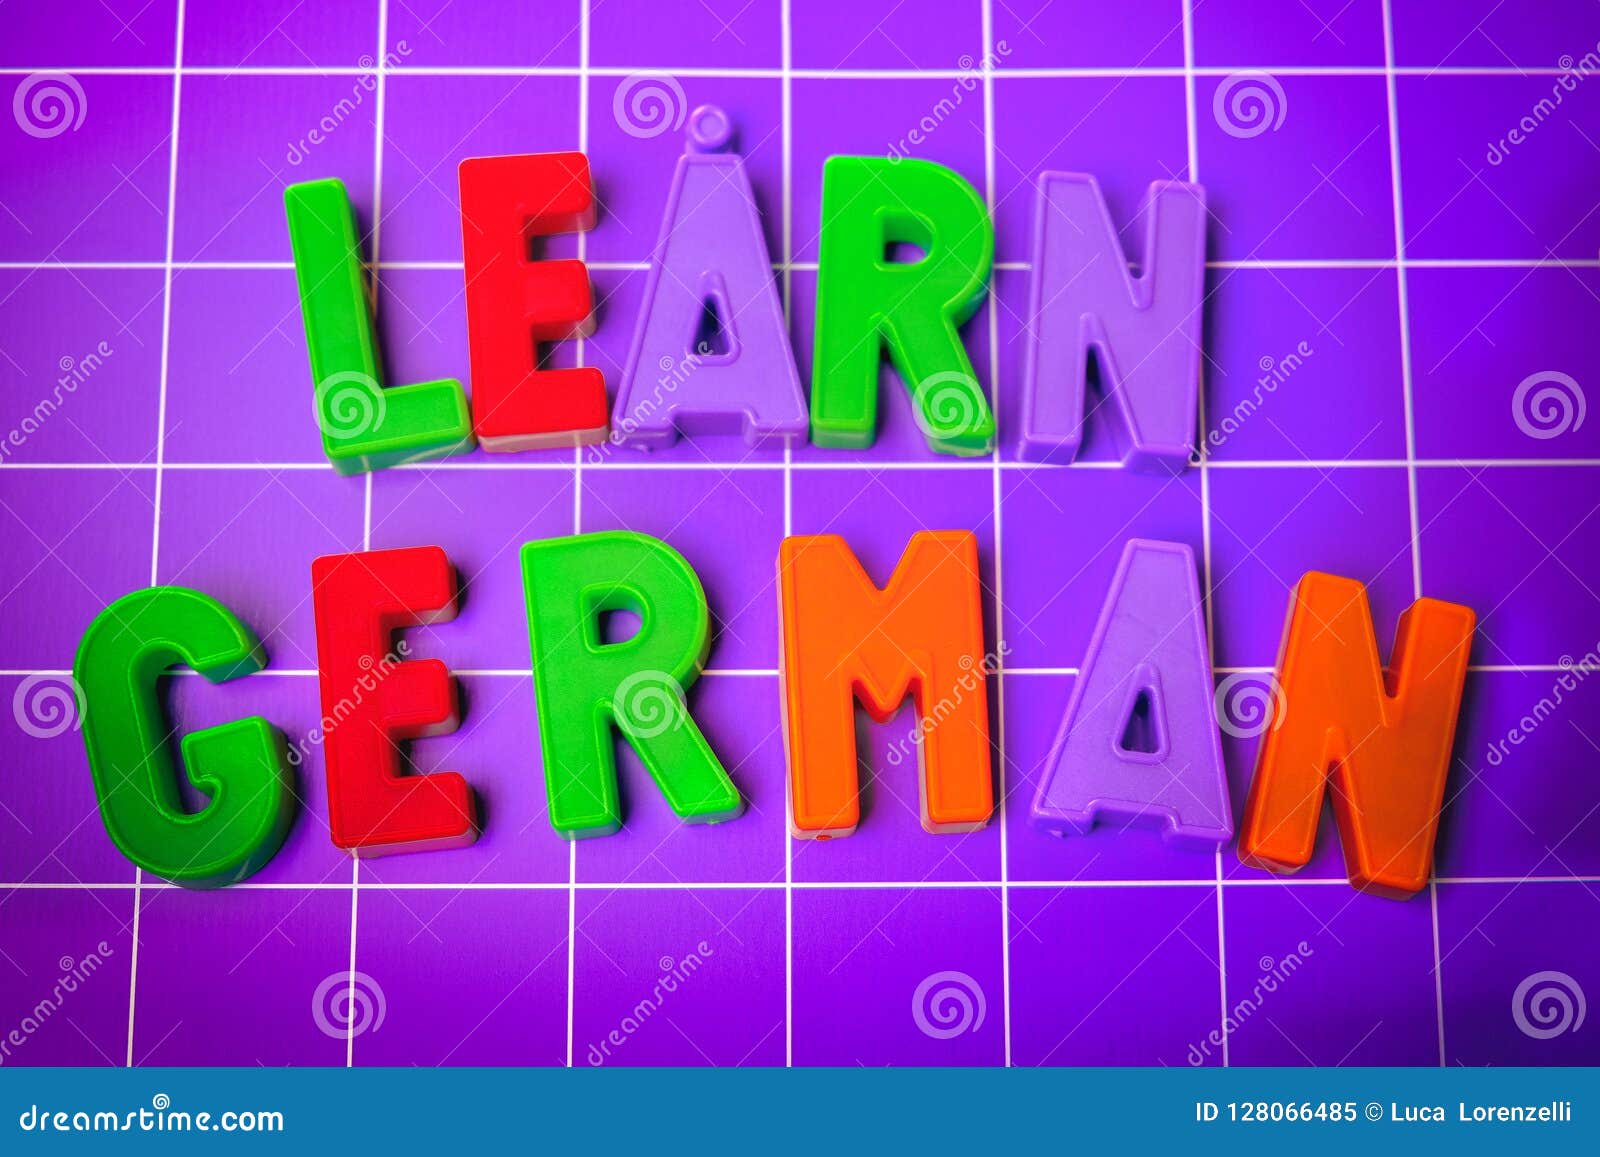 Learn German Language Alphabet On Magnets Letters Stock Image Image Of Cover Hello 128066485